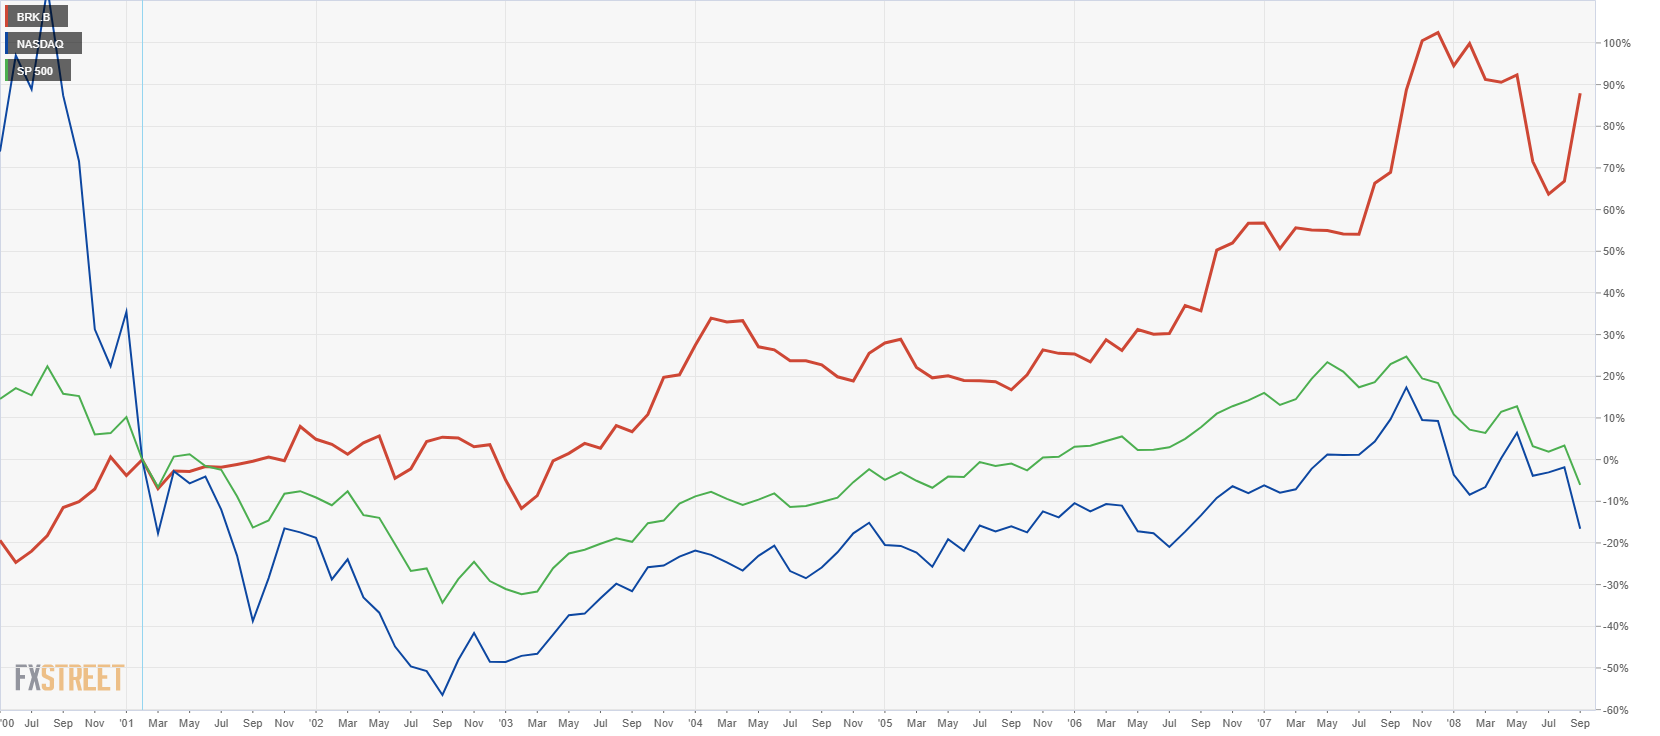 BRK.B performance vs NASDAQ and S&P 500 between 2000 and 2008